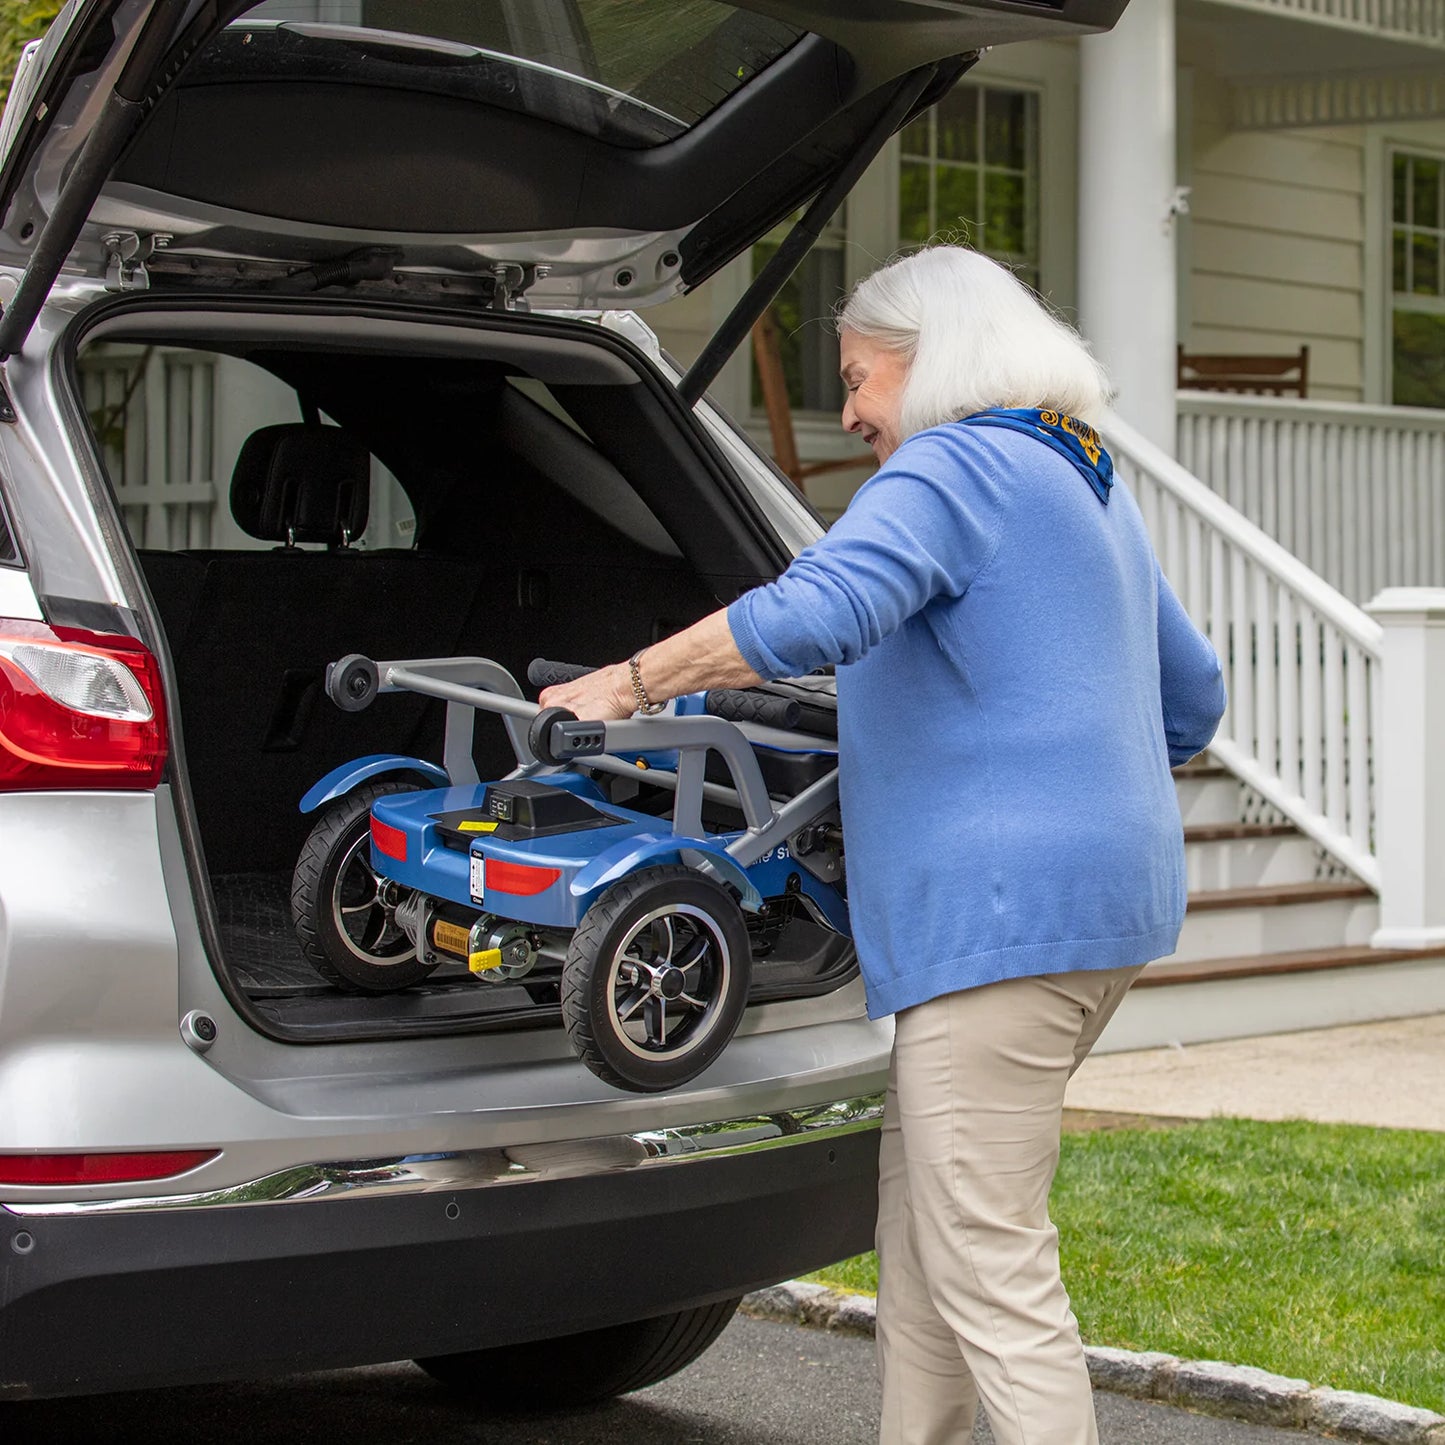 Senior loading the Journey So Lite Lightweight Folding Power Scooter into the trunk of her vehicle